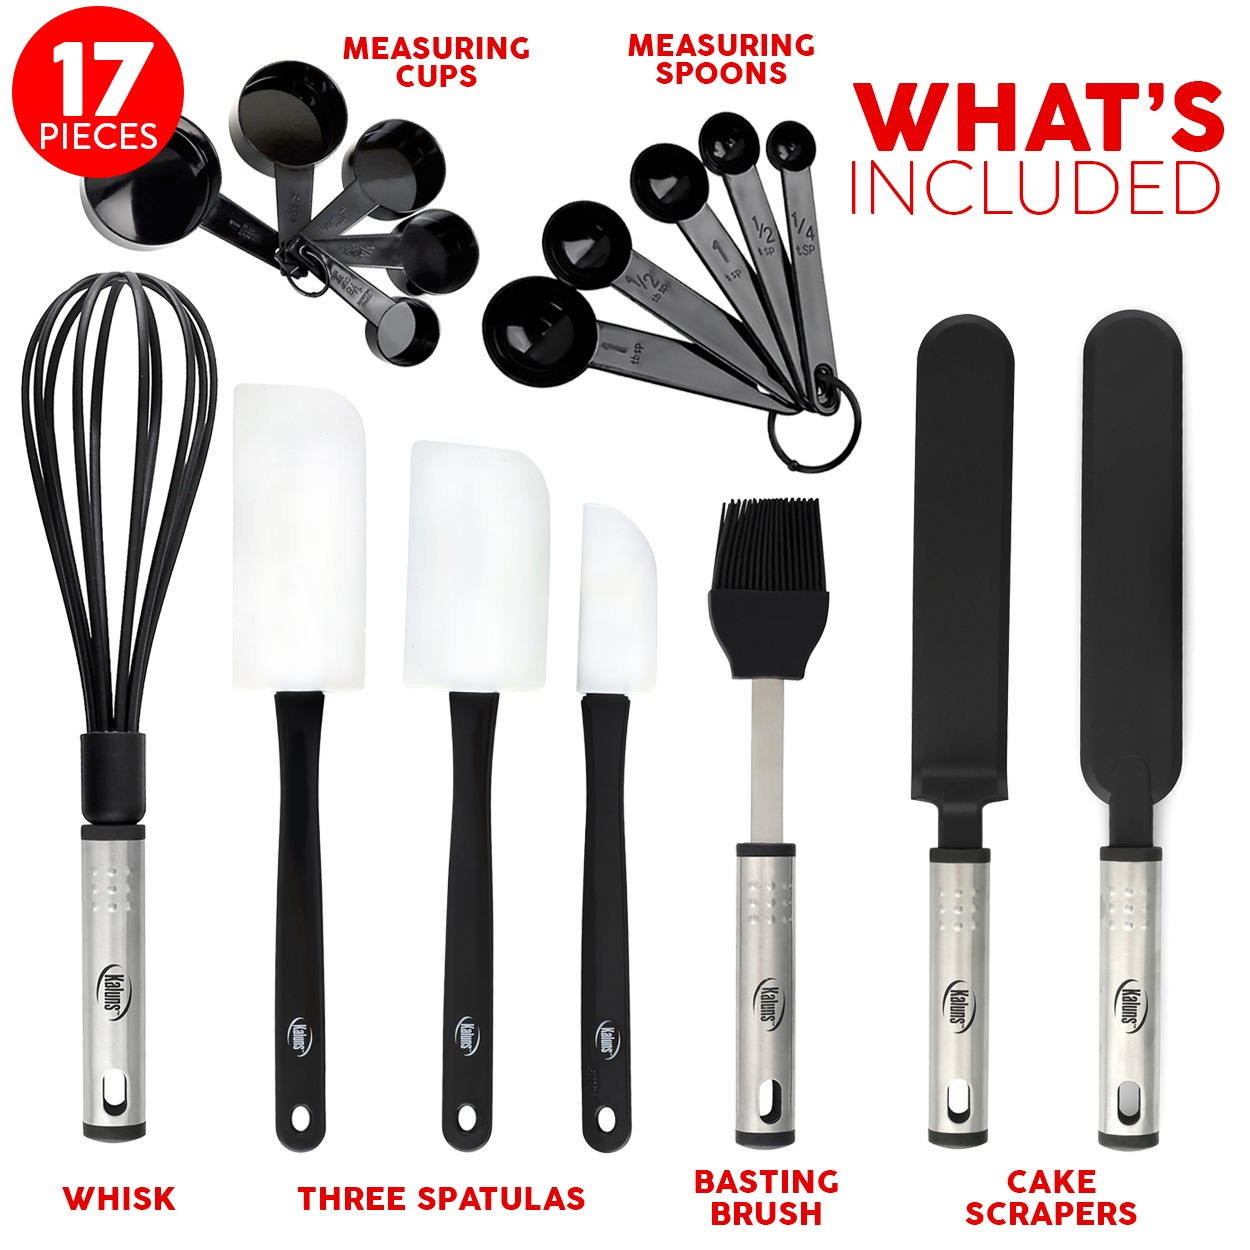 Baking Utensils - 17 Nylon Stainless Steel Baking Supplies - Non-Stick and Heat Resistant Bakeware set - New Baker's Gadget Tools Collection - Great Silicone Spatula - Best Holiday Gift Idea. - image 3 of 7